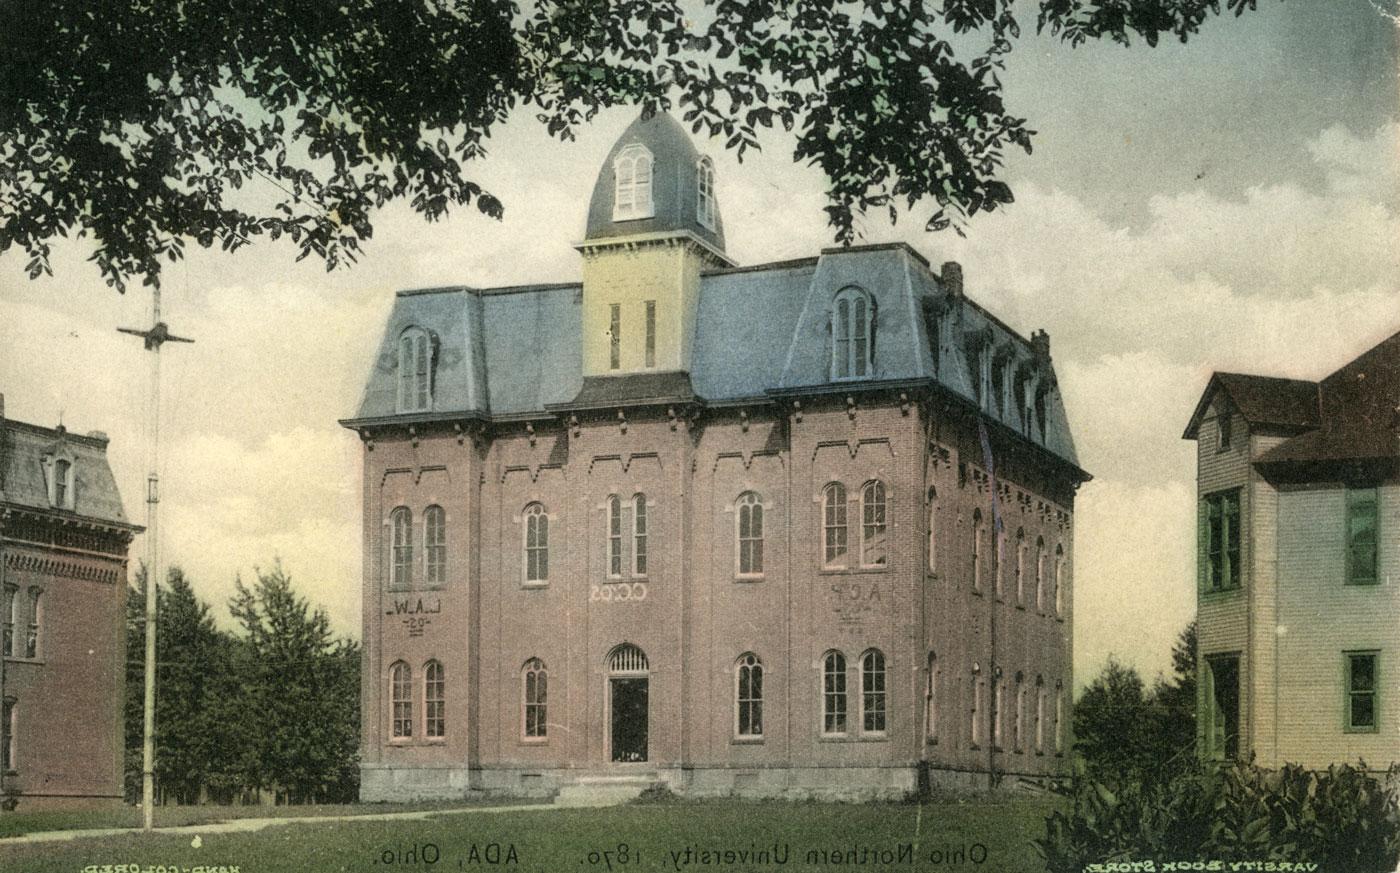 Normal building was the first building on campus